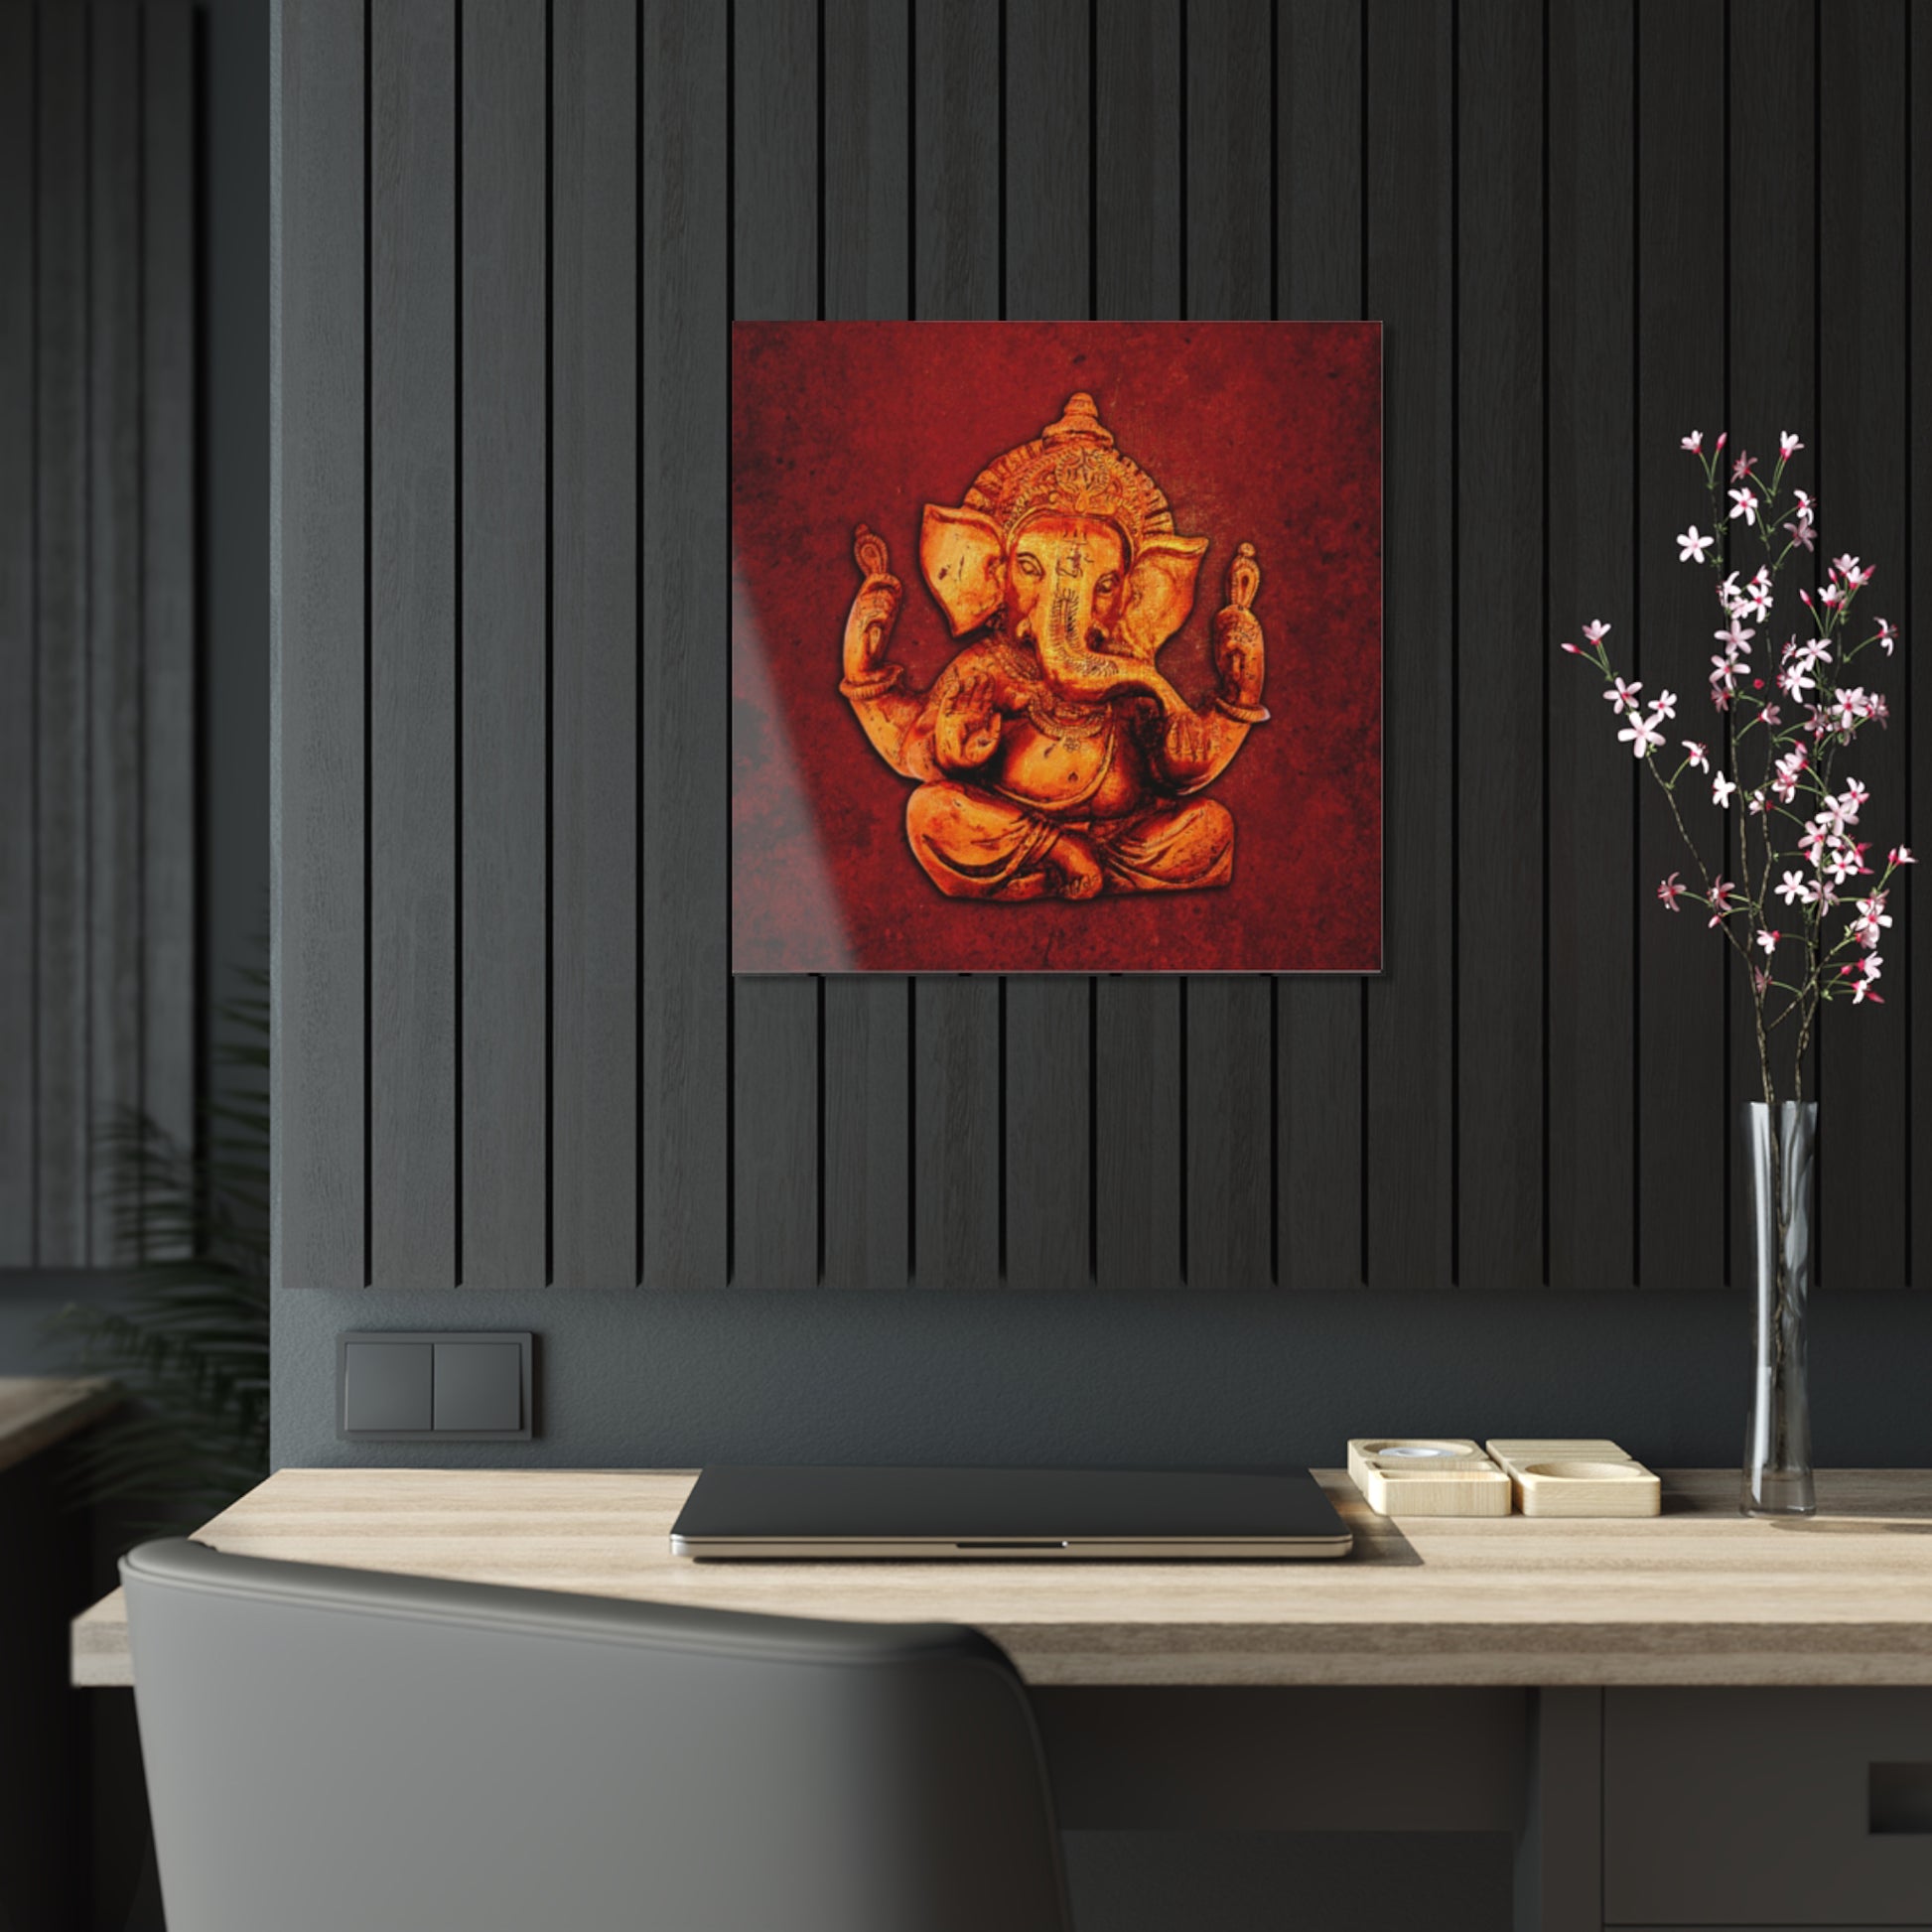 Golden Ganesha on a Distressed Lava Red Background Printed on Crystal Clear Acrylic Panel 20x20 hung